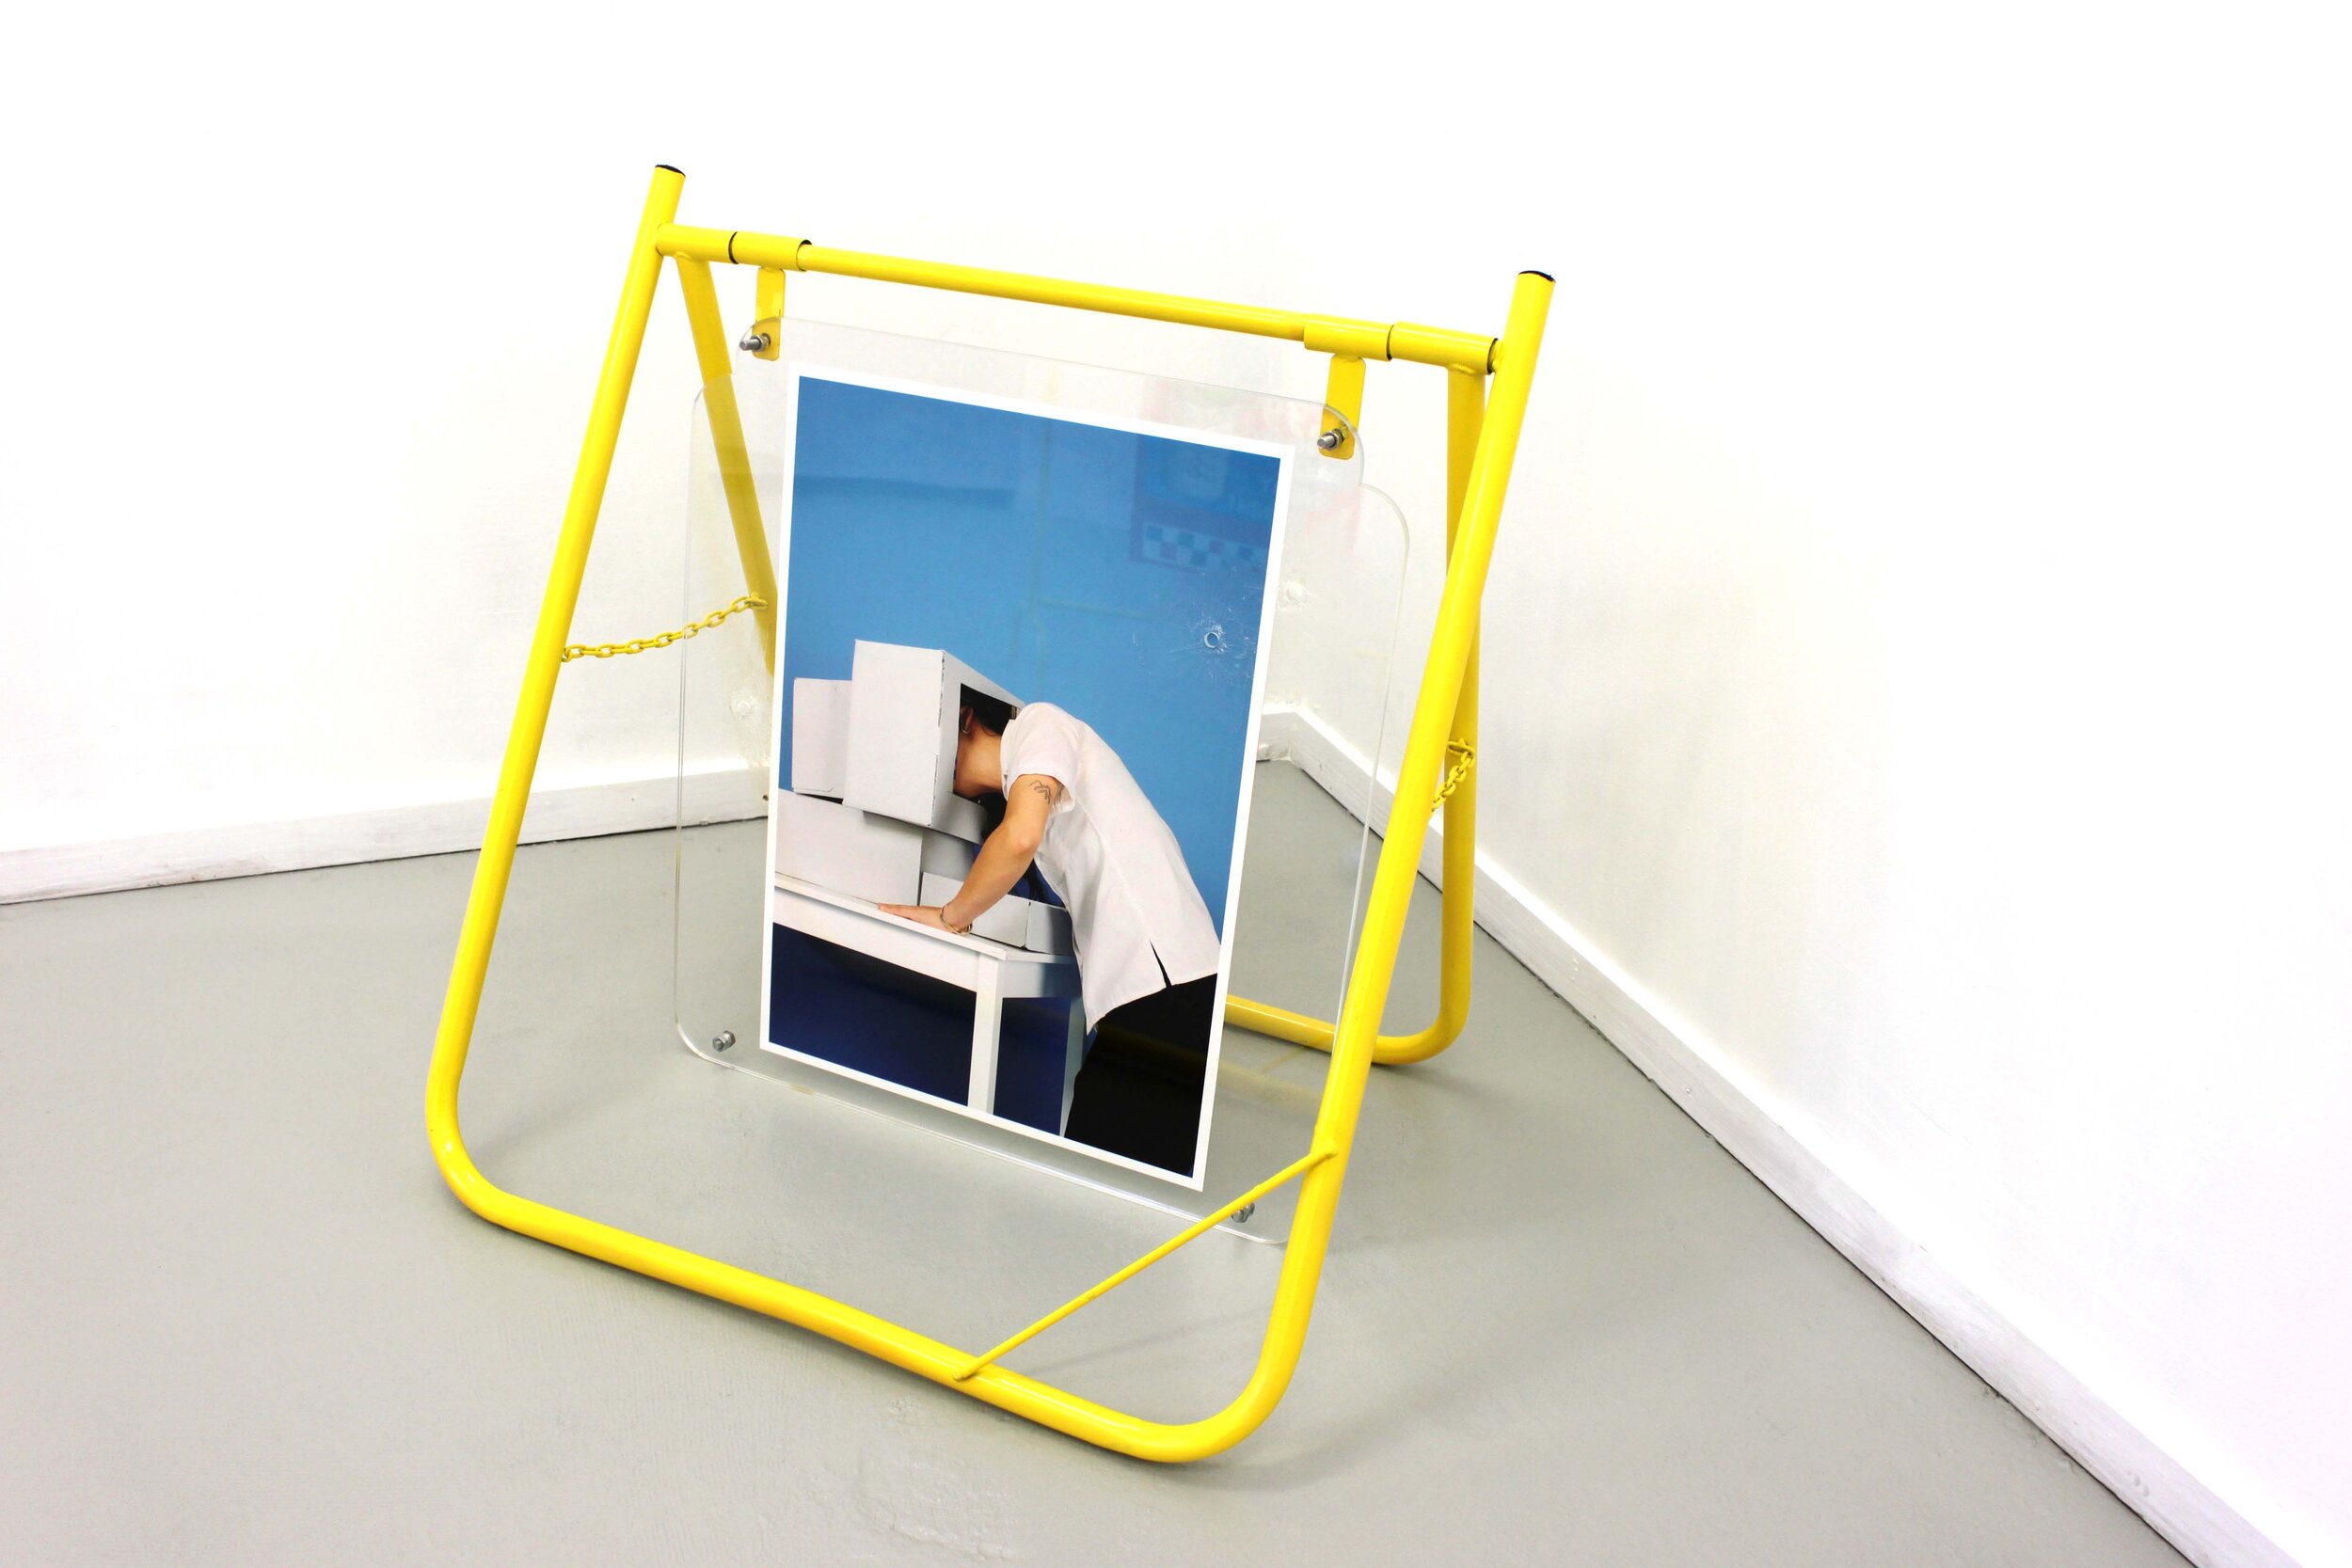  Swingset, 2019  found object, perspex, silicon, acrylic    Who’s Who, 2019 (front)  inkjet print  Photo: Max Goodman    Photo courtesy of the artist  